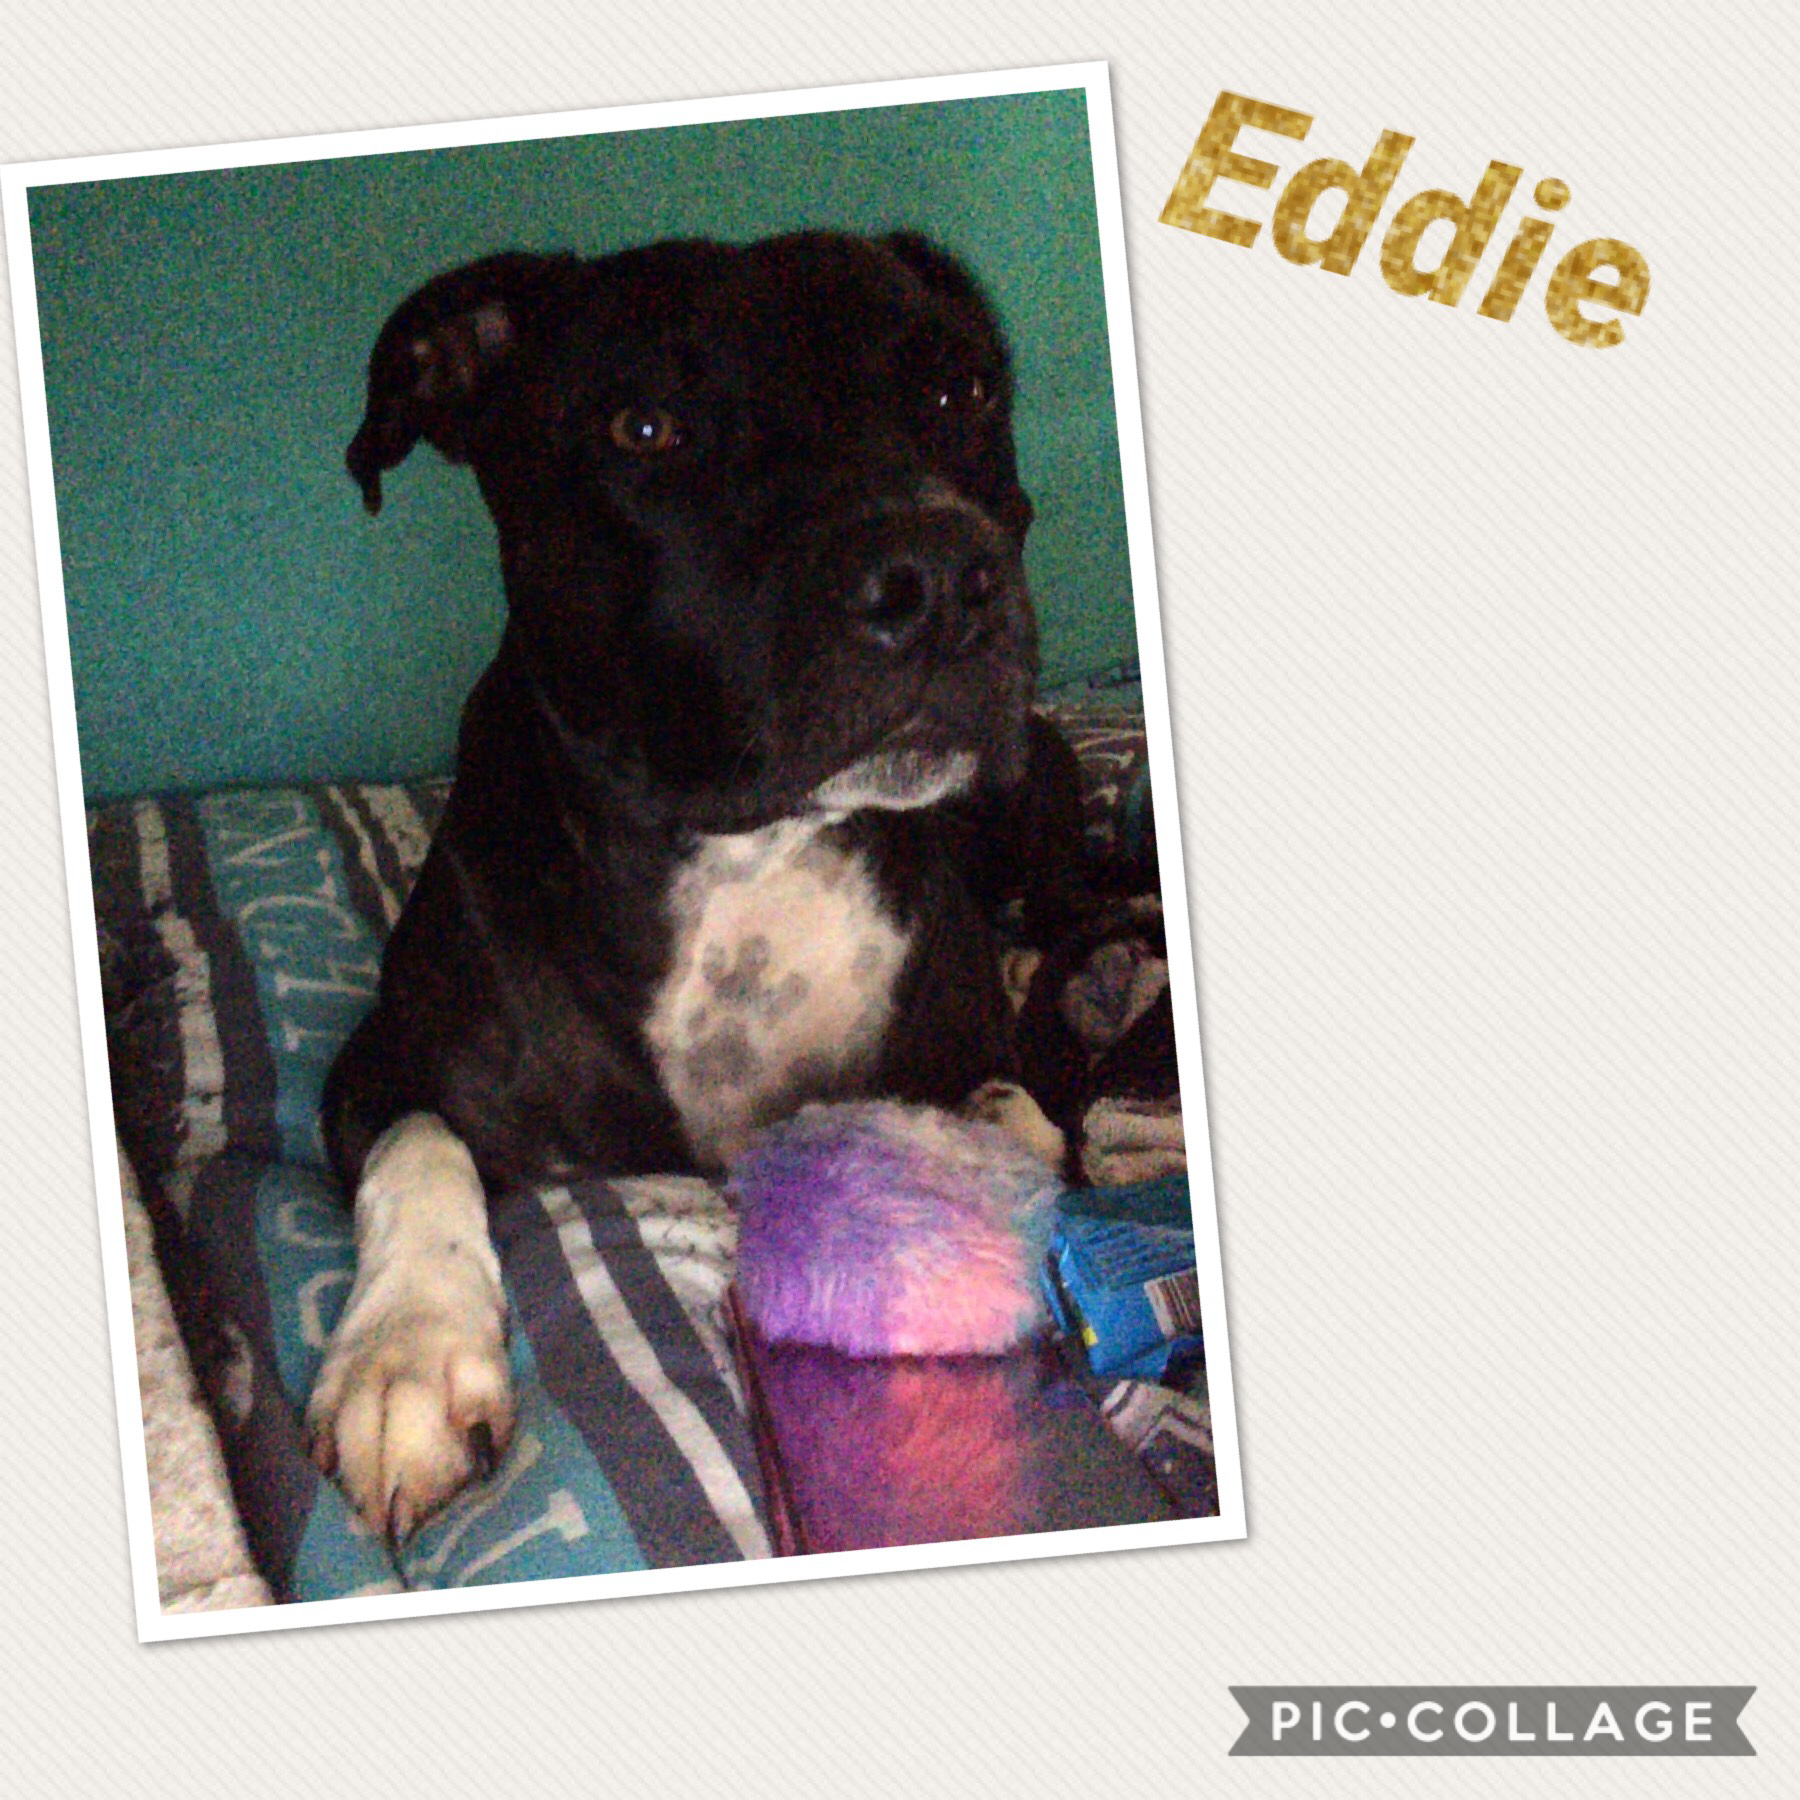 Hey, do you like dogs and I do!!!! 
My dog called Eddie and he is 3 years old 